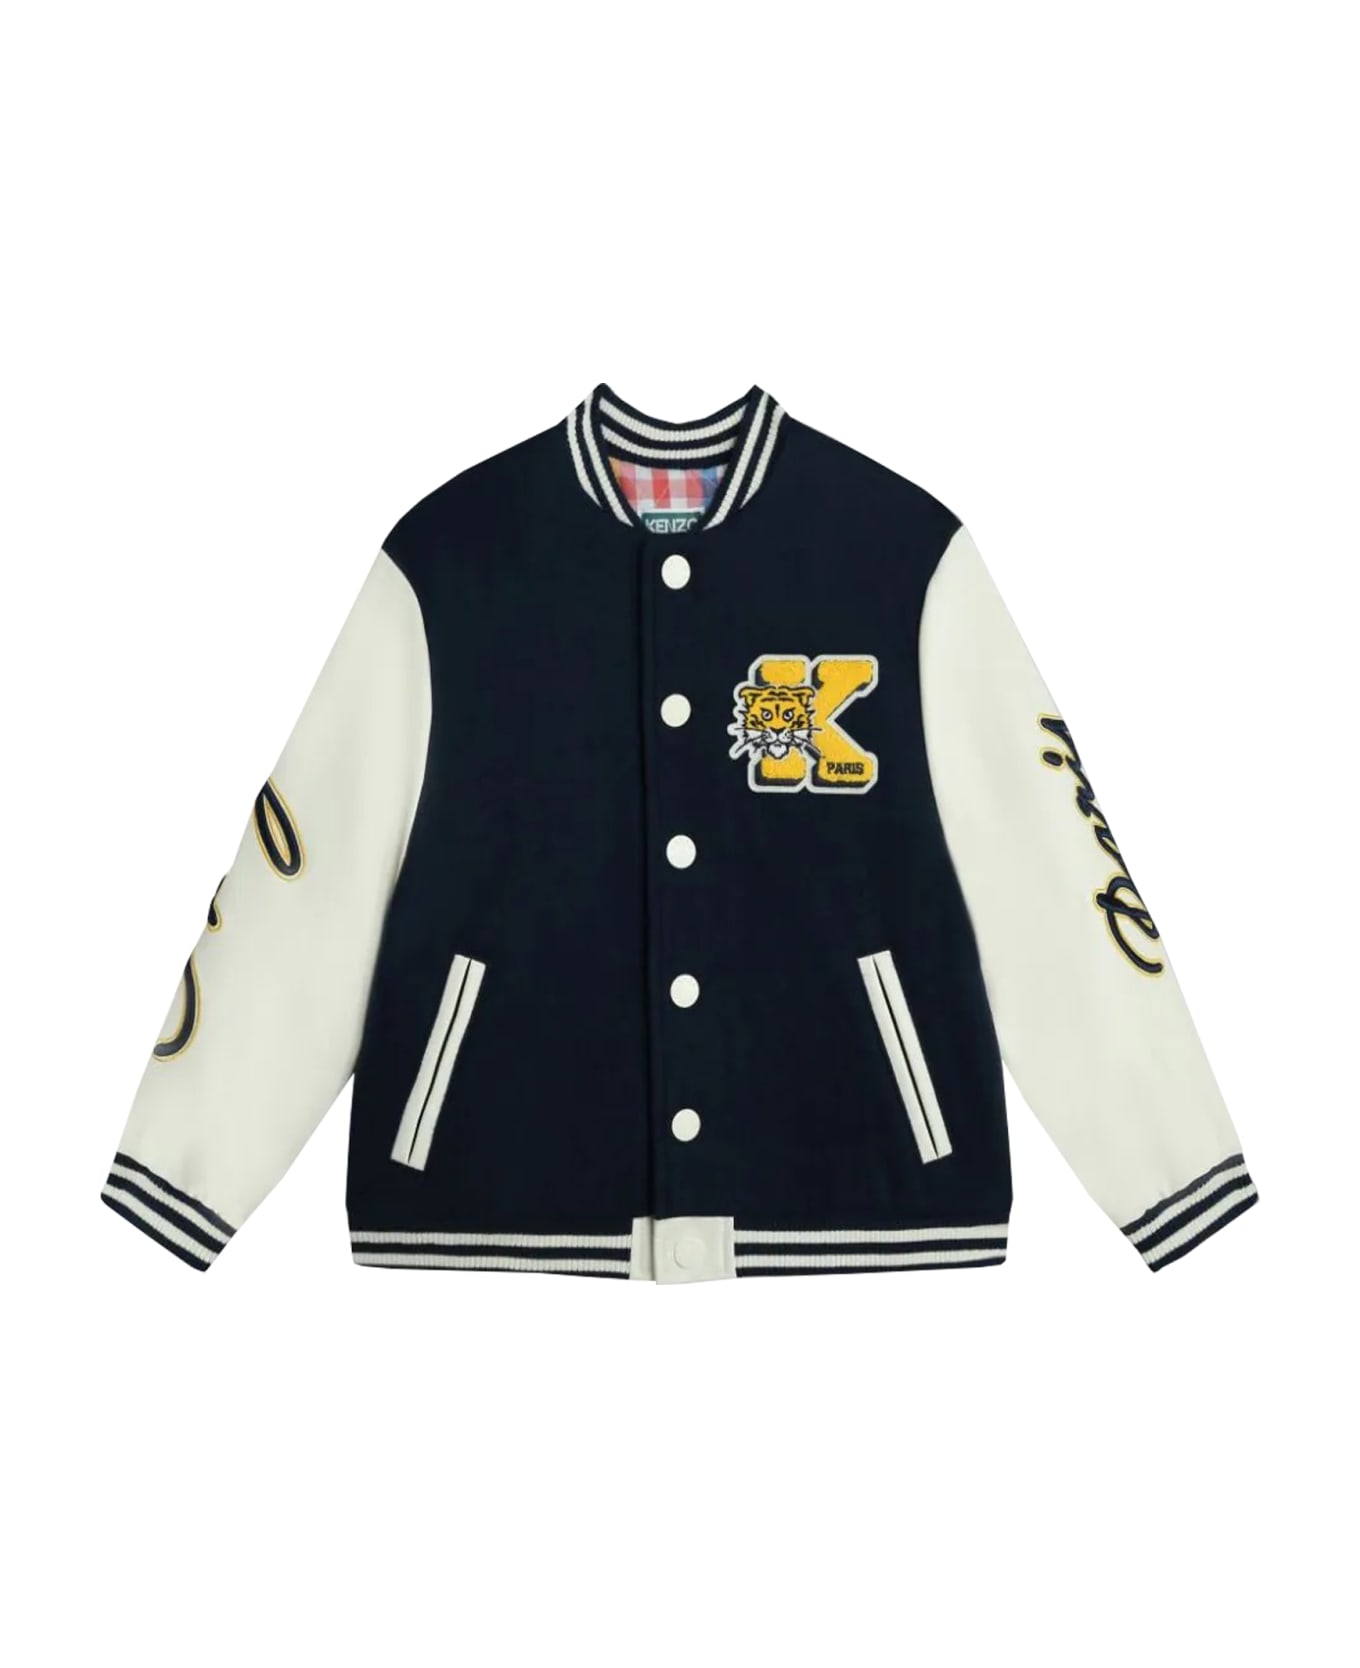 Kenzo Kids Bi-material Bomber Jacket Embroidered "campus" - Blue